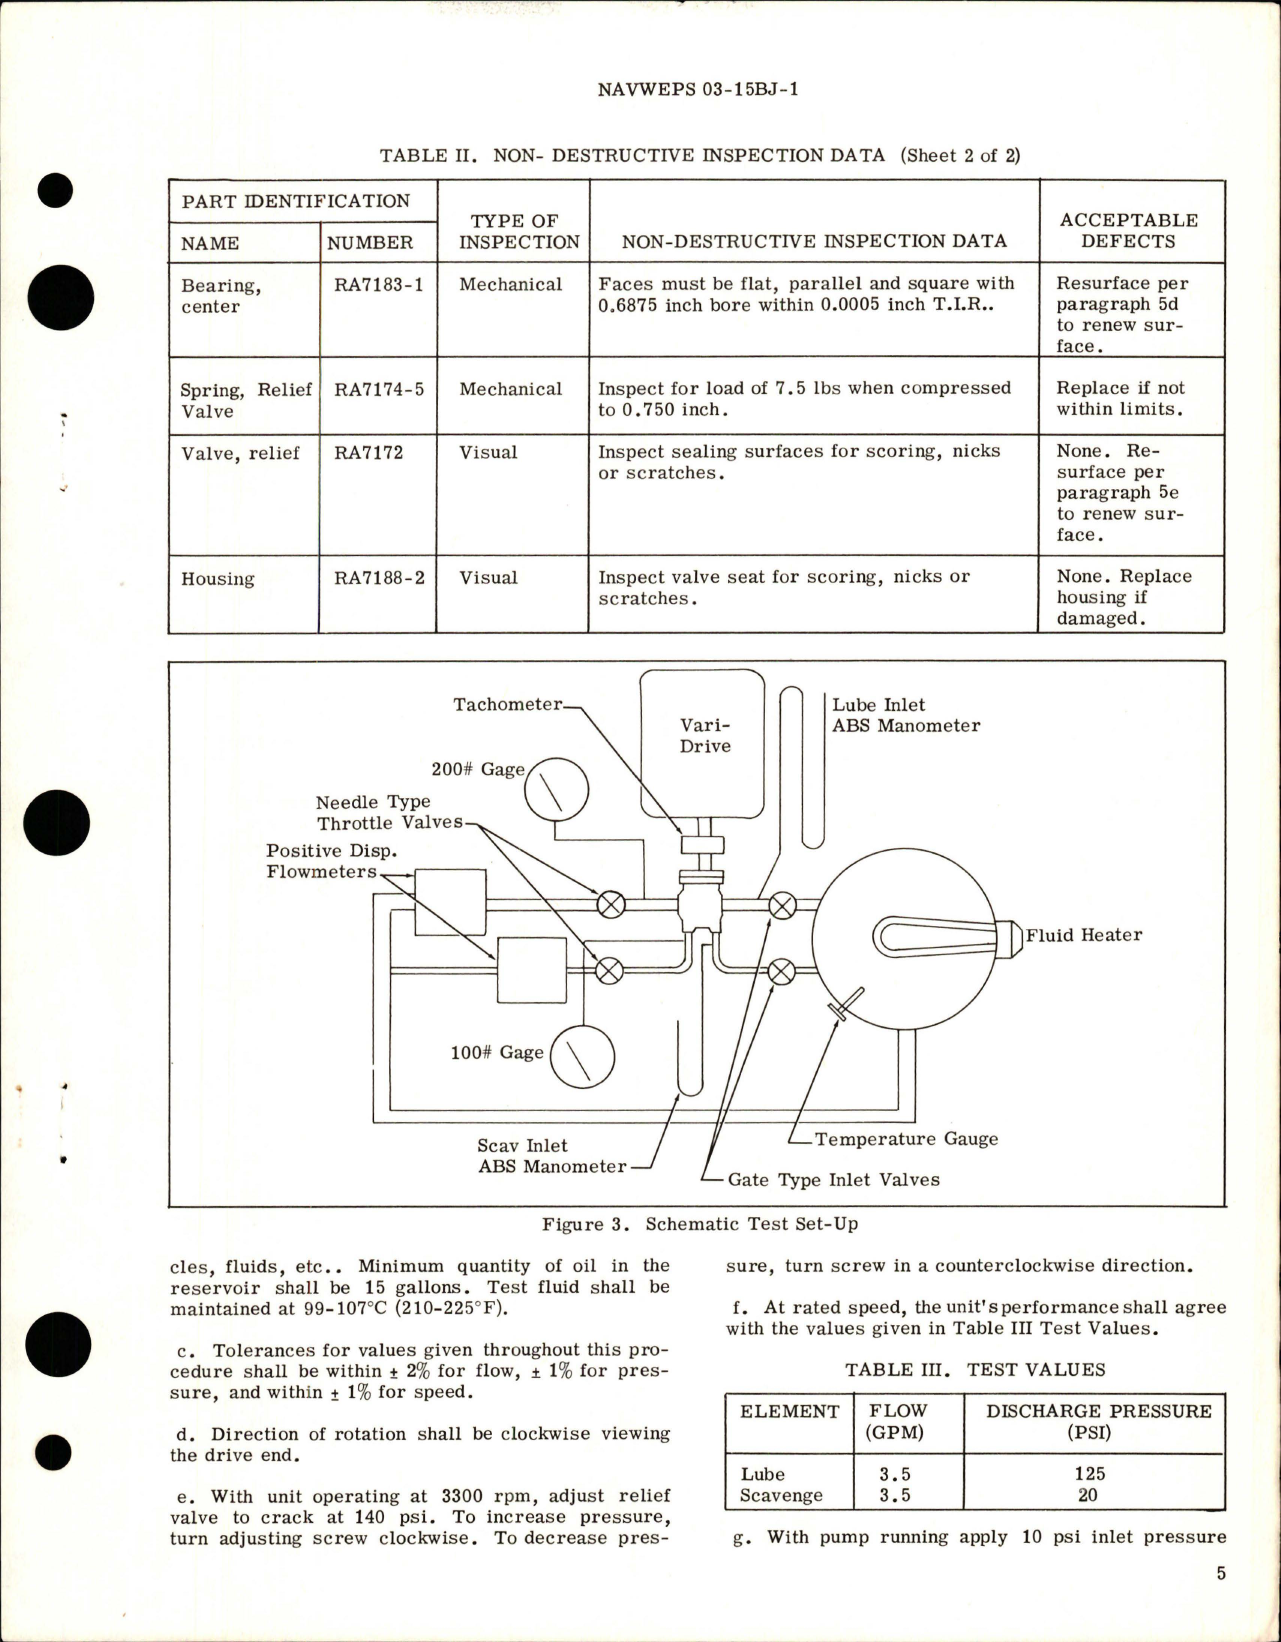 Sample page 5 from AirCorps Library document: Overhaul Instructions with Parts for Power Driven Rotary Pump - Model RG7150E